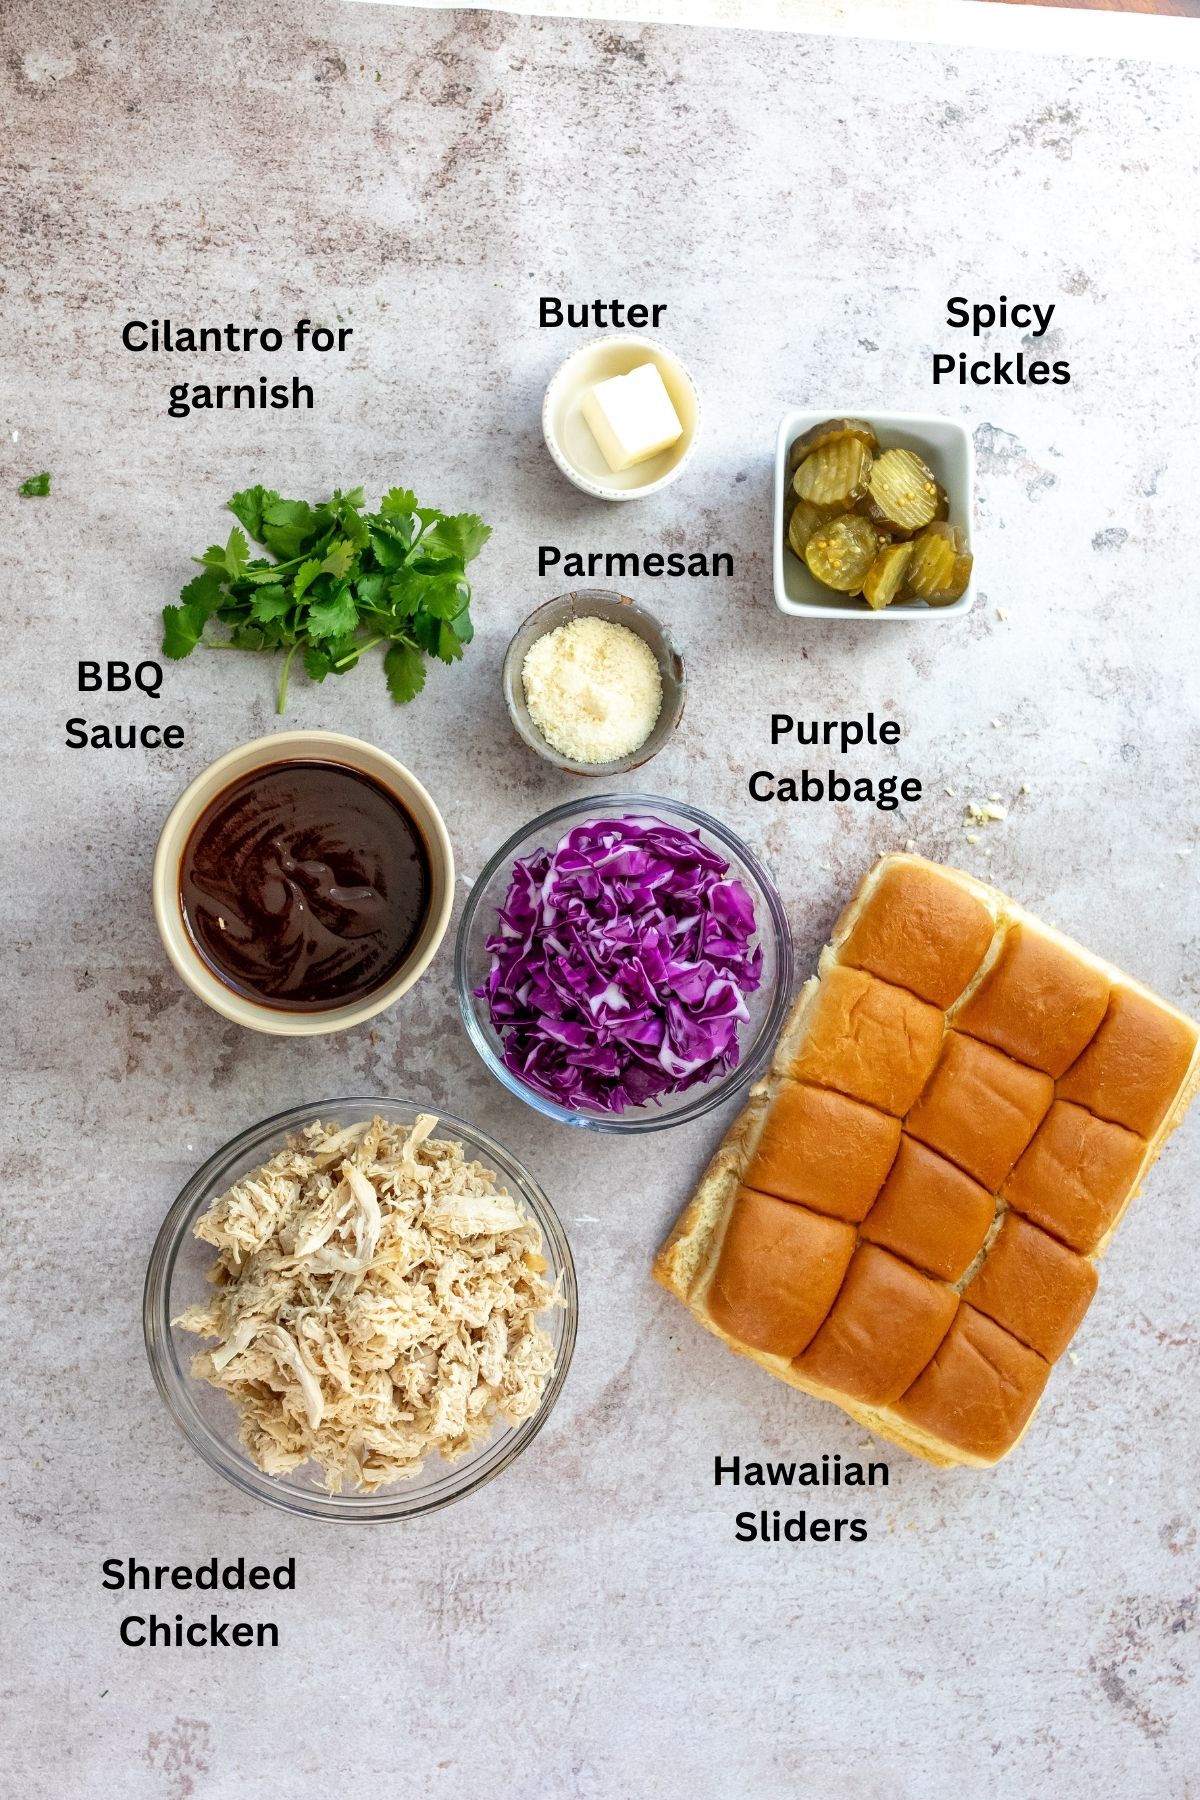 Ingredients needed to make the sliders, BBQ Sauce, Chicken and more. 